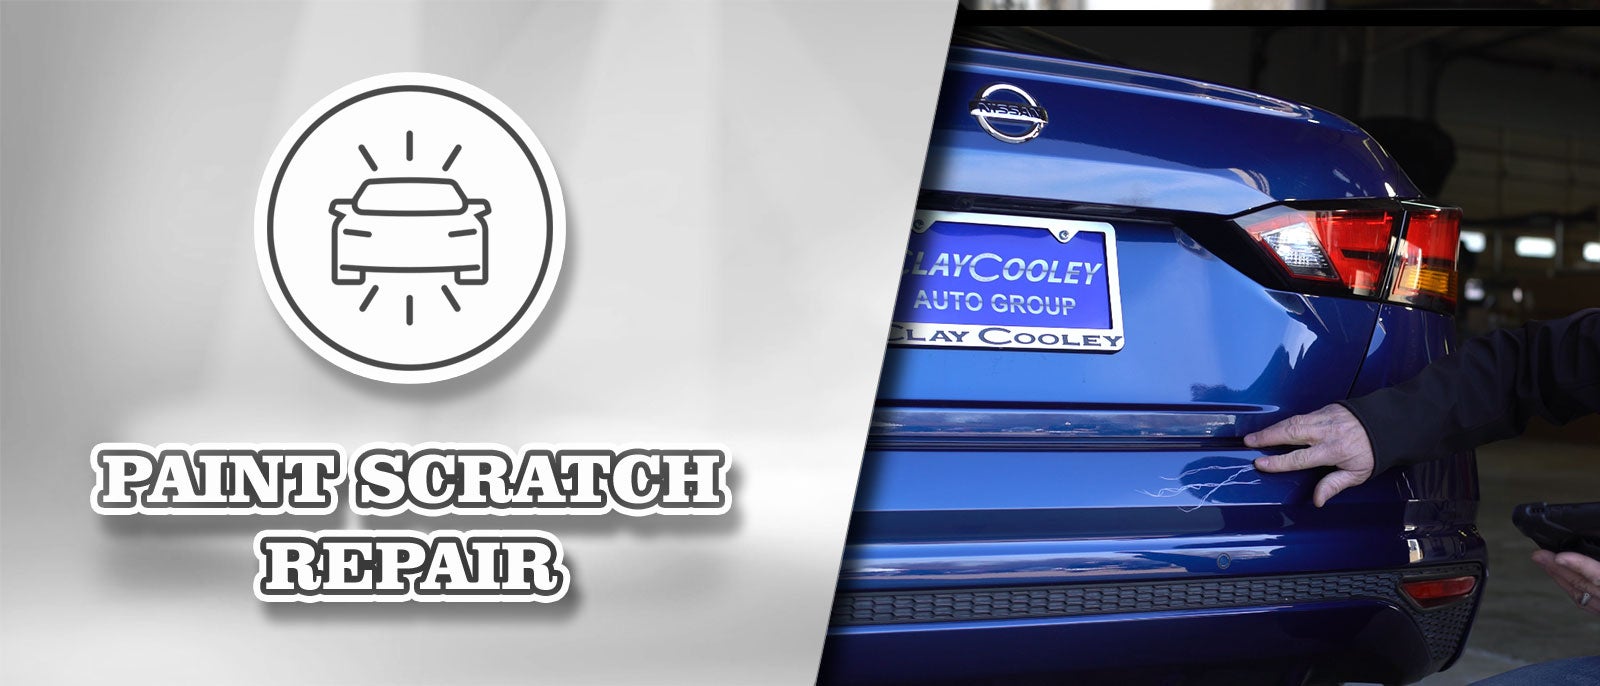 Paint Scratch Repair at Clay Cooley Chrysler Jeep Dodge Ram in Irving TX